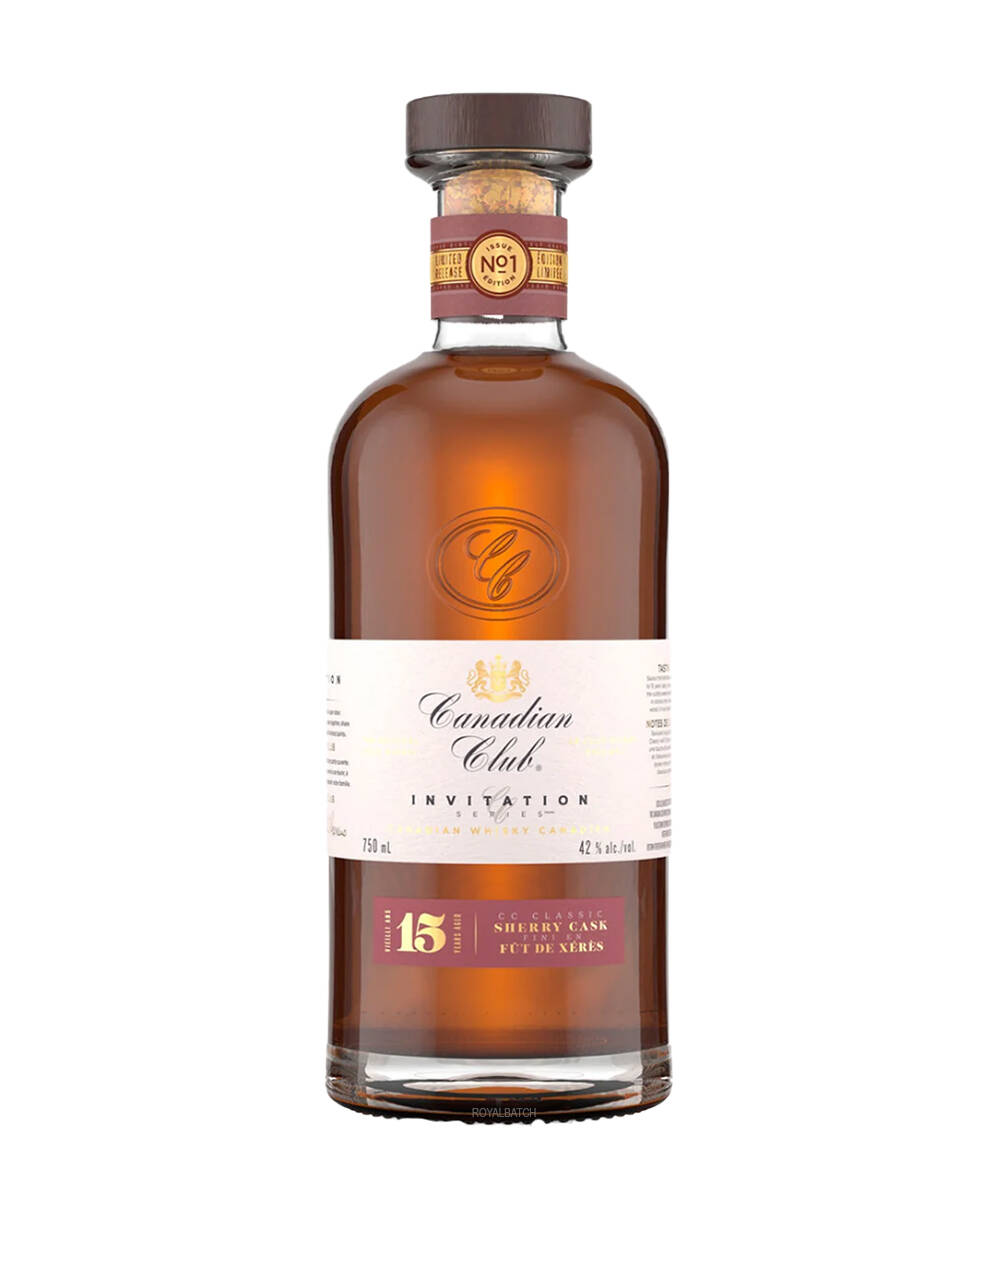 Canadian Club Invitation Sherry Cask 15 year Old Canadian Whisky